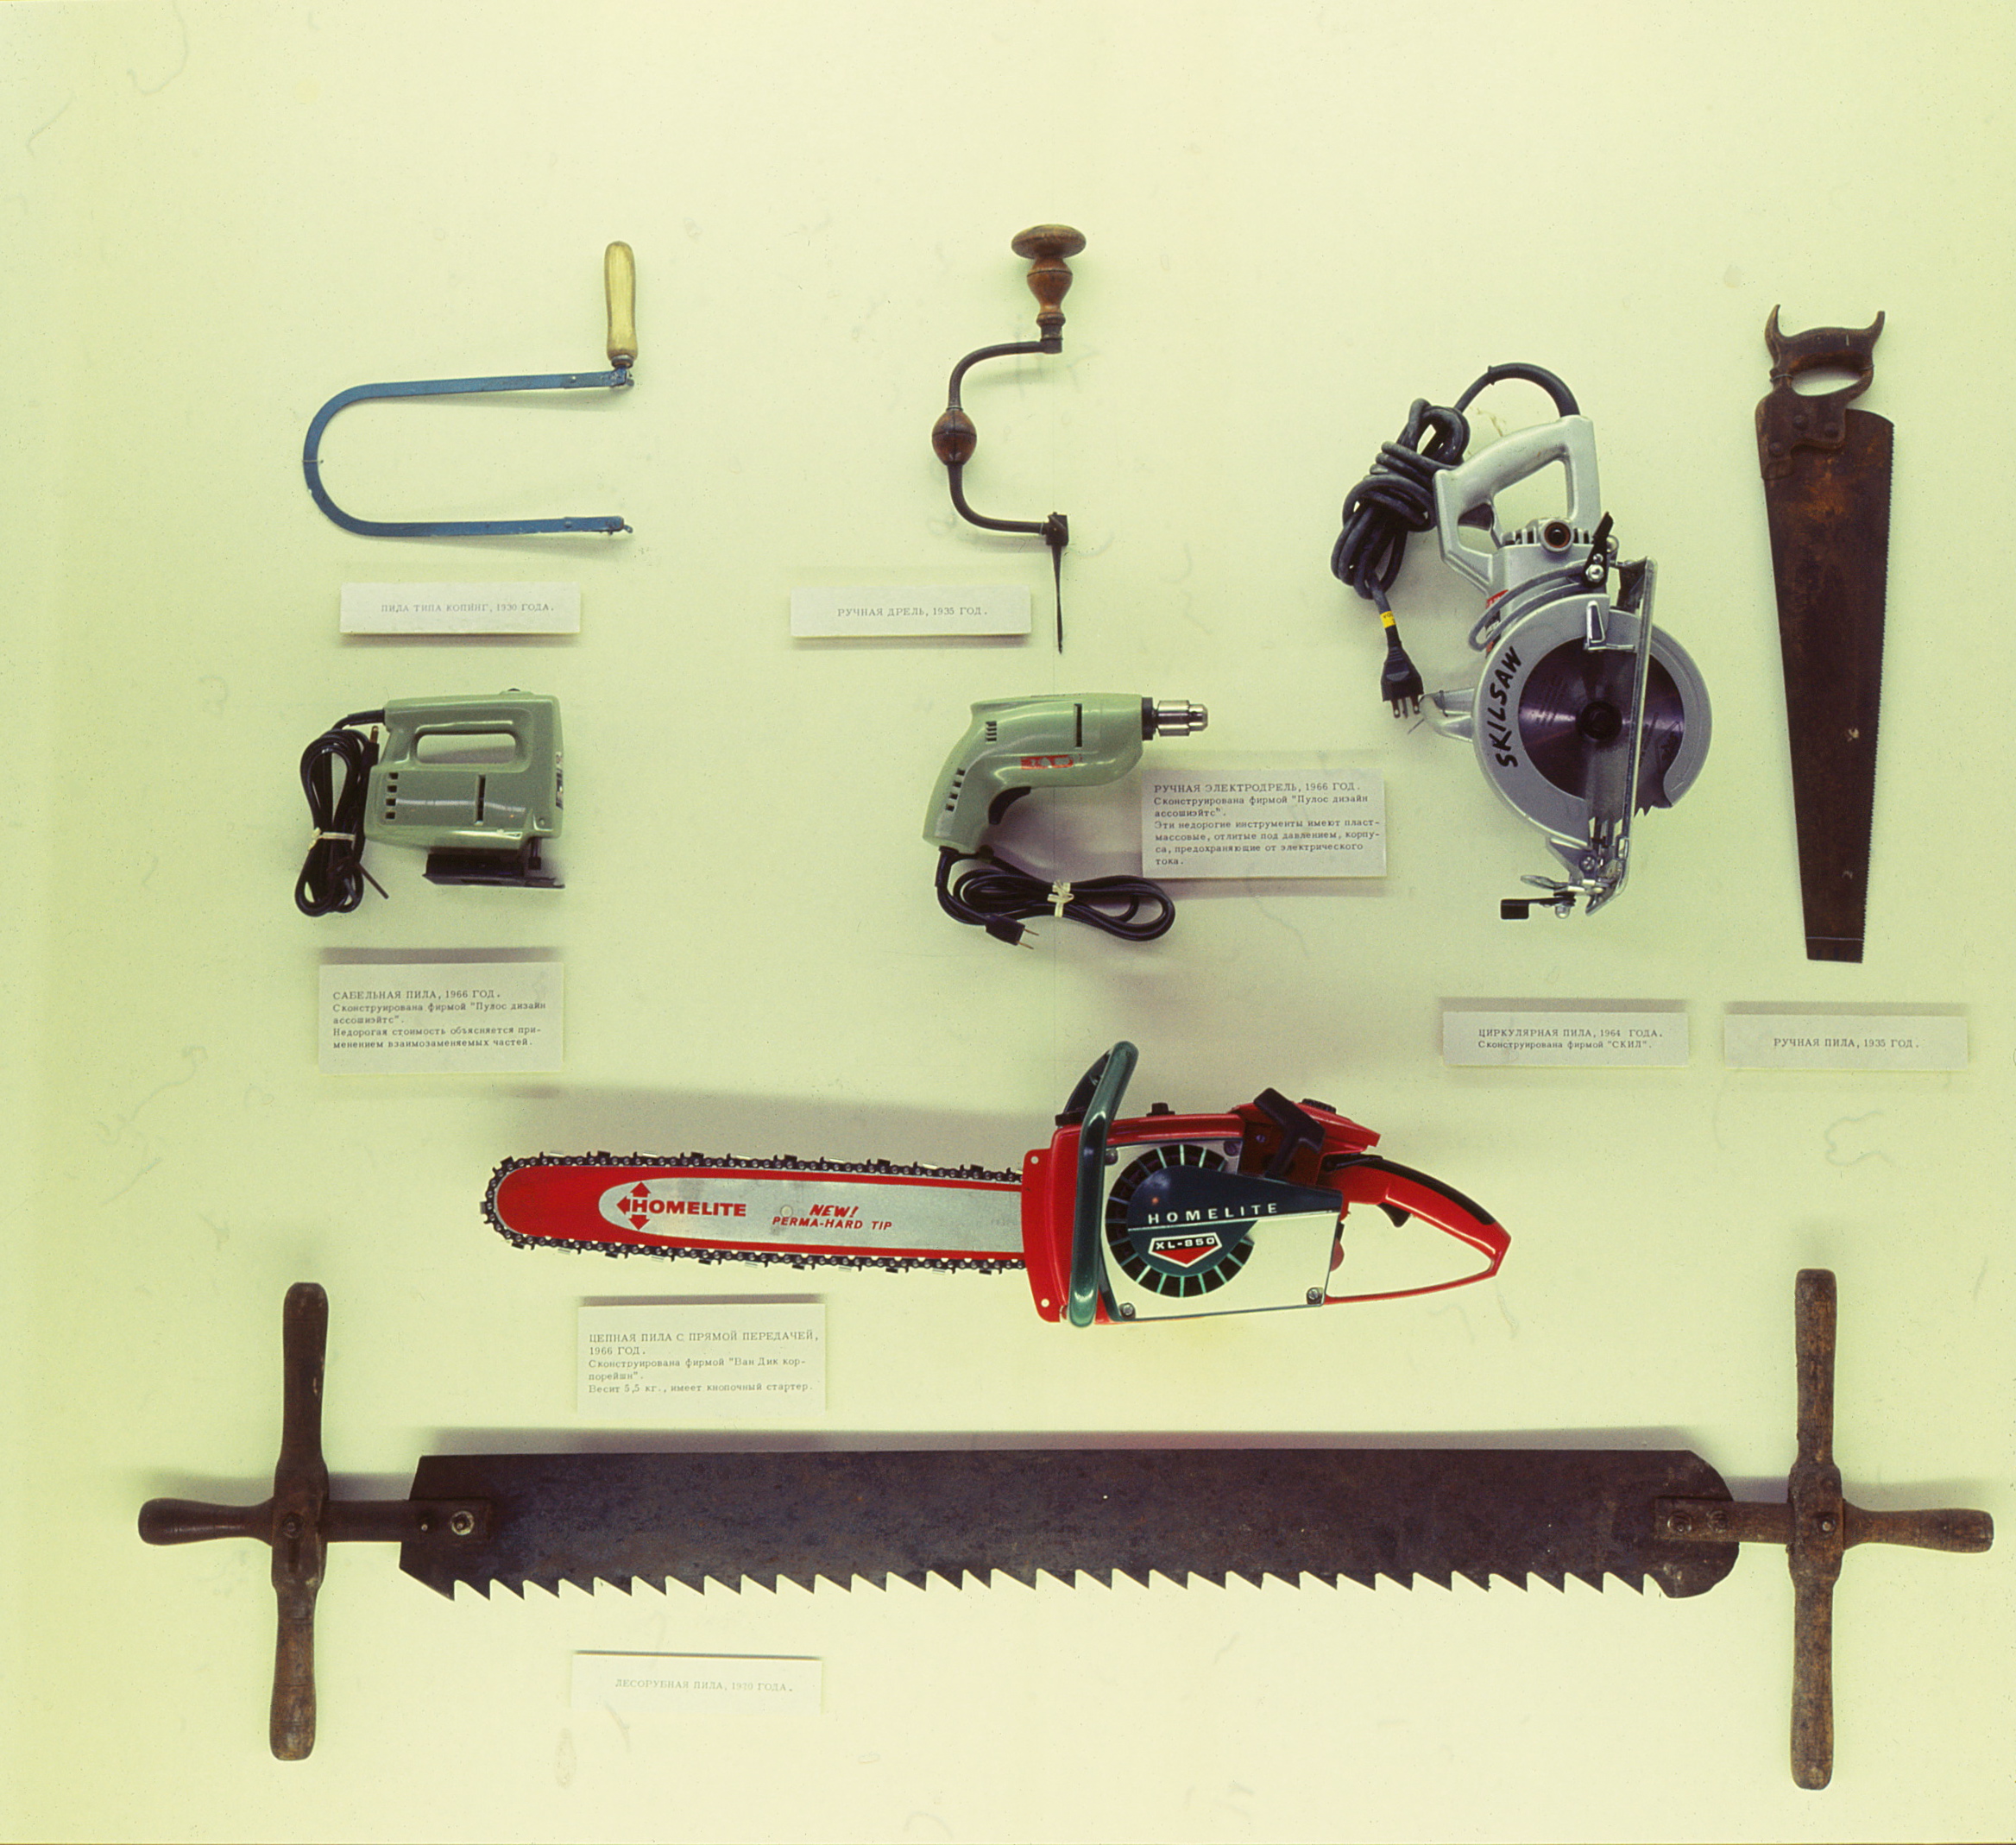 Display case featuring manual and power tools.